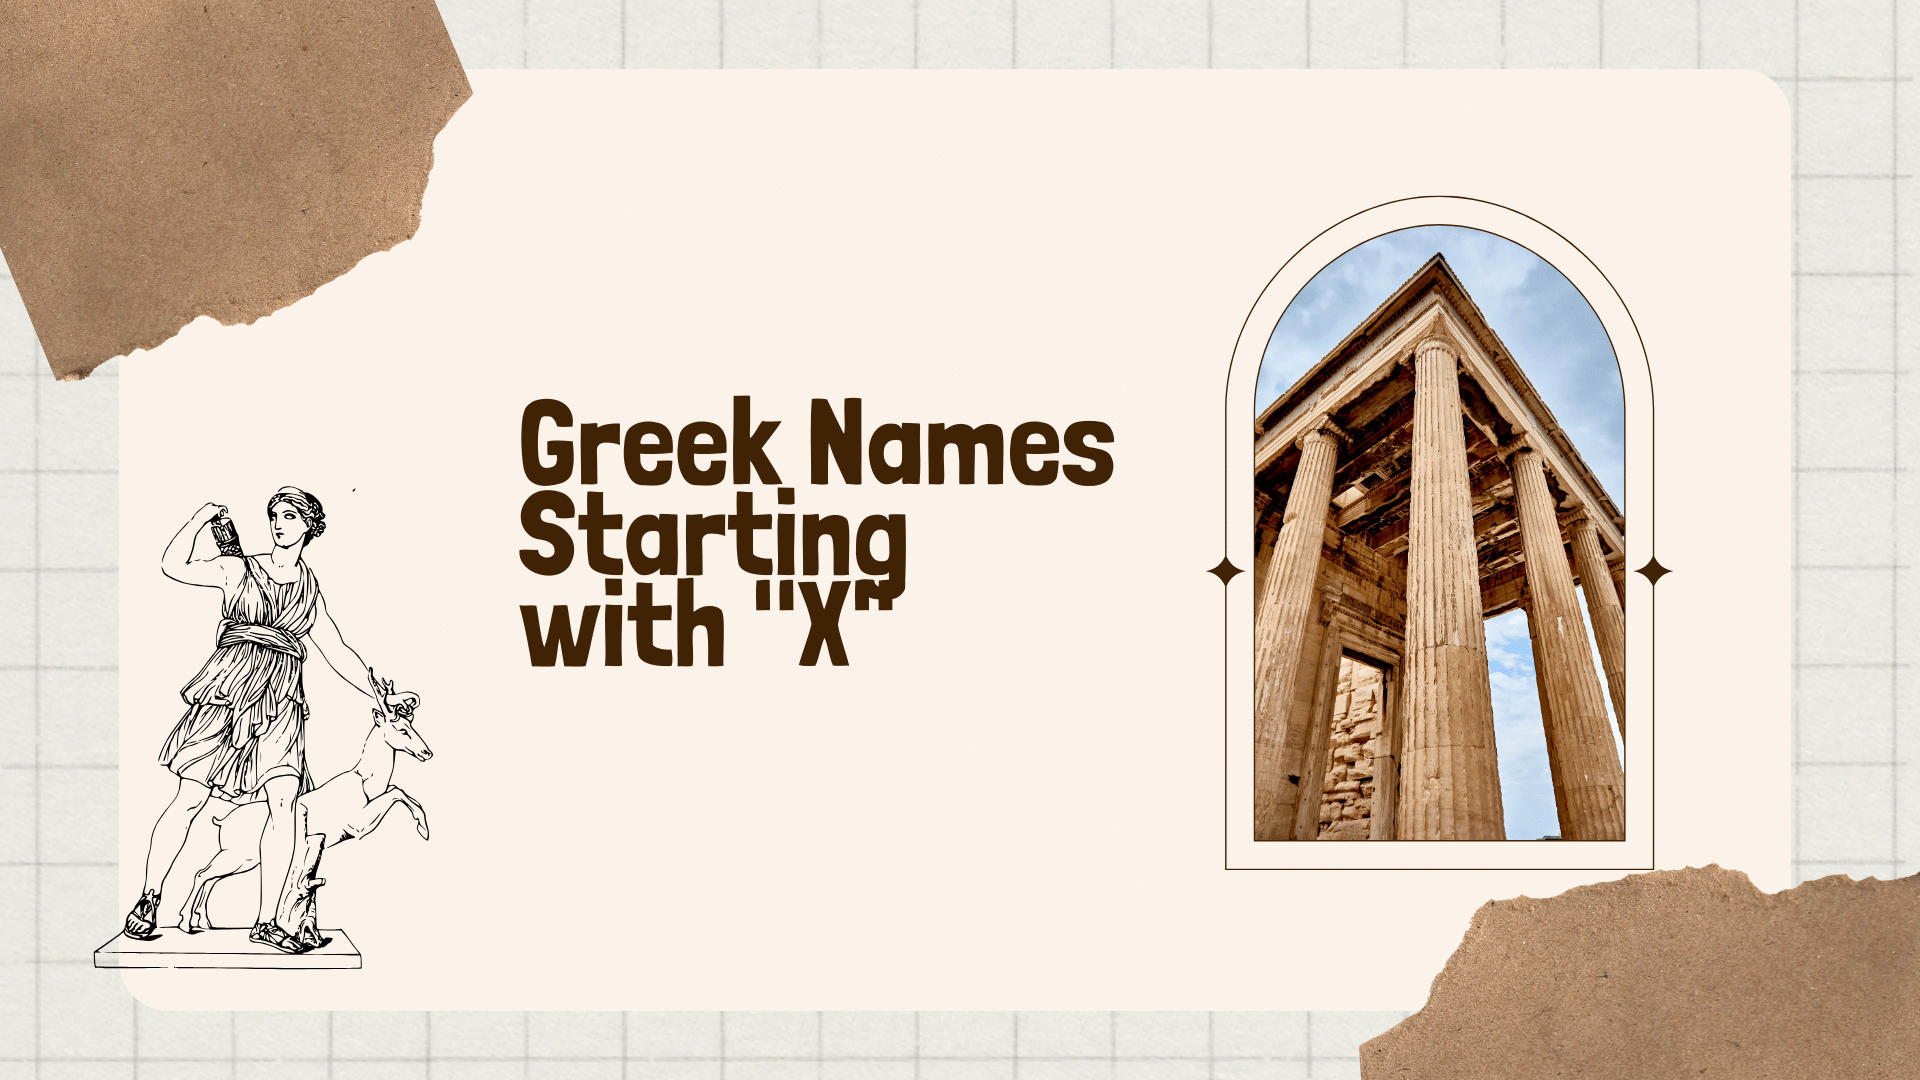 Greek Names Starting With "X"